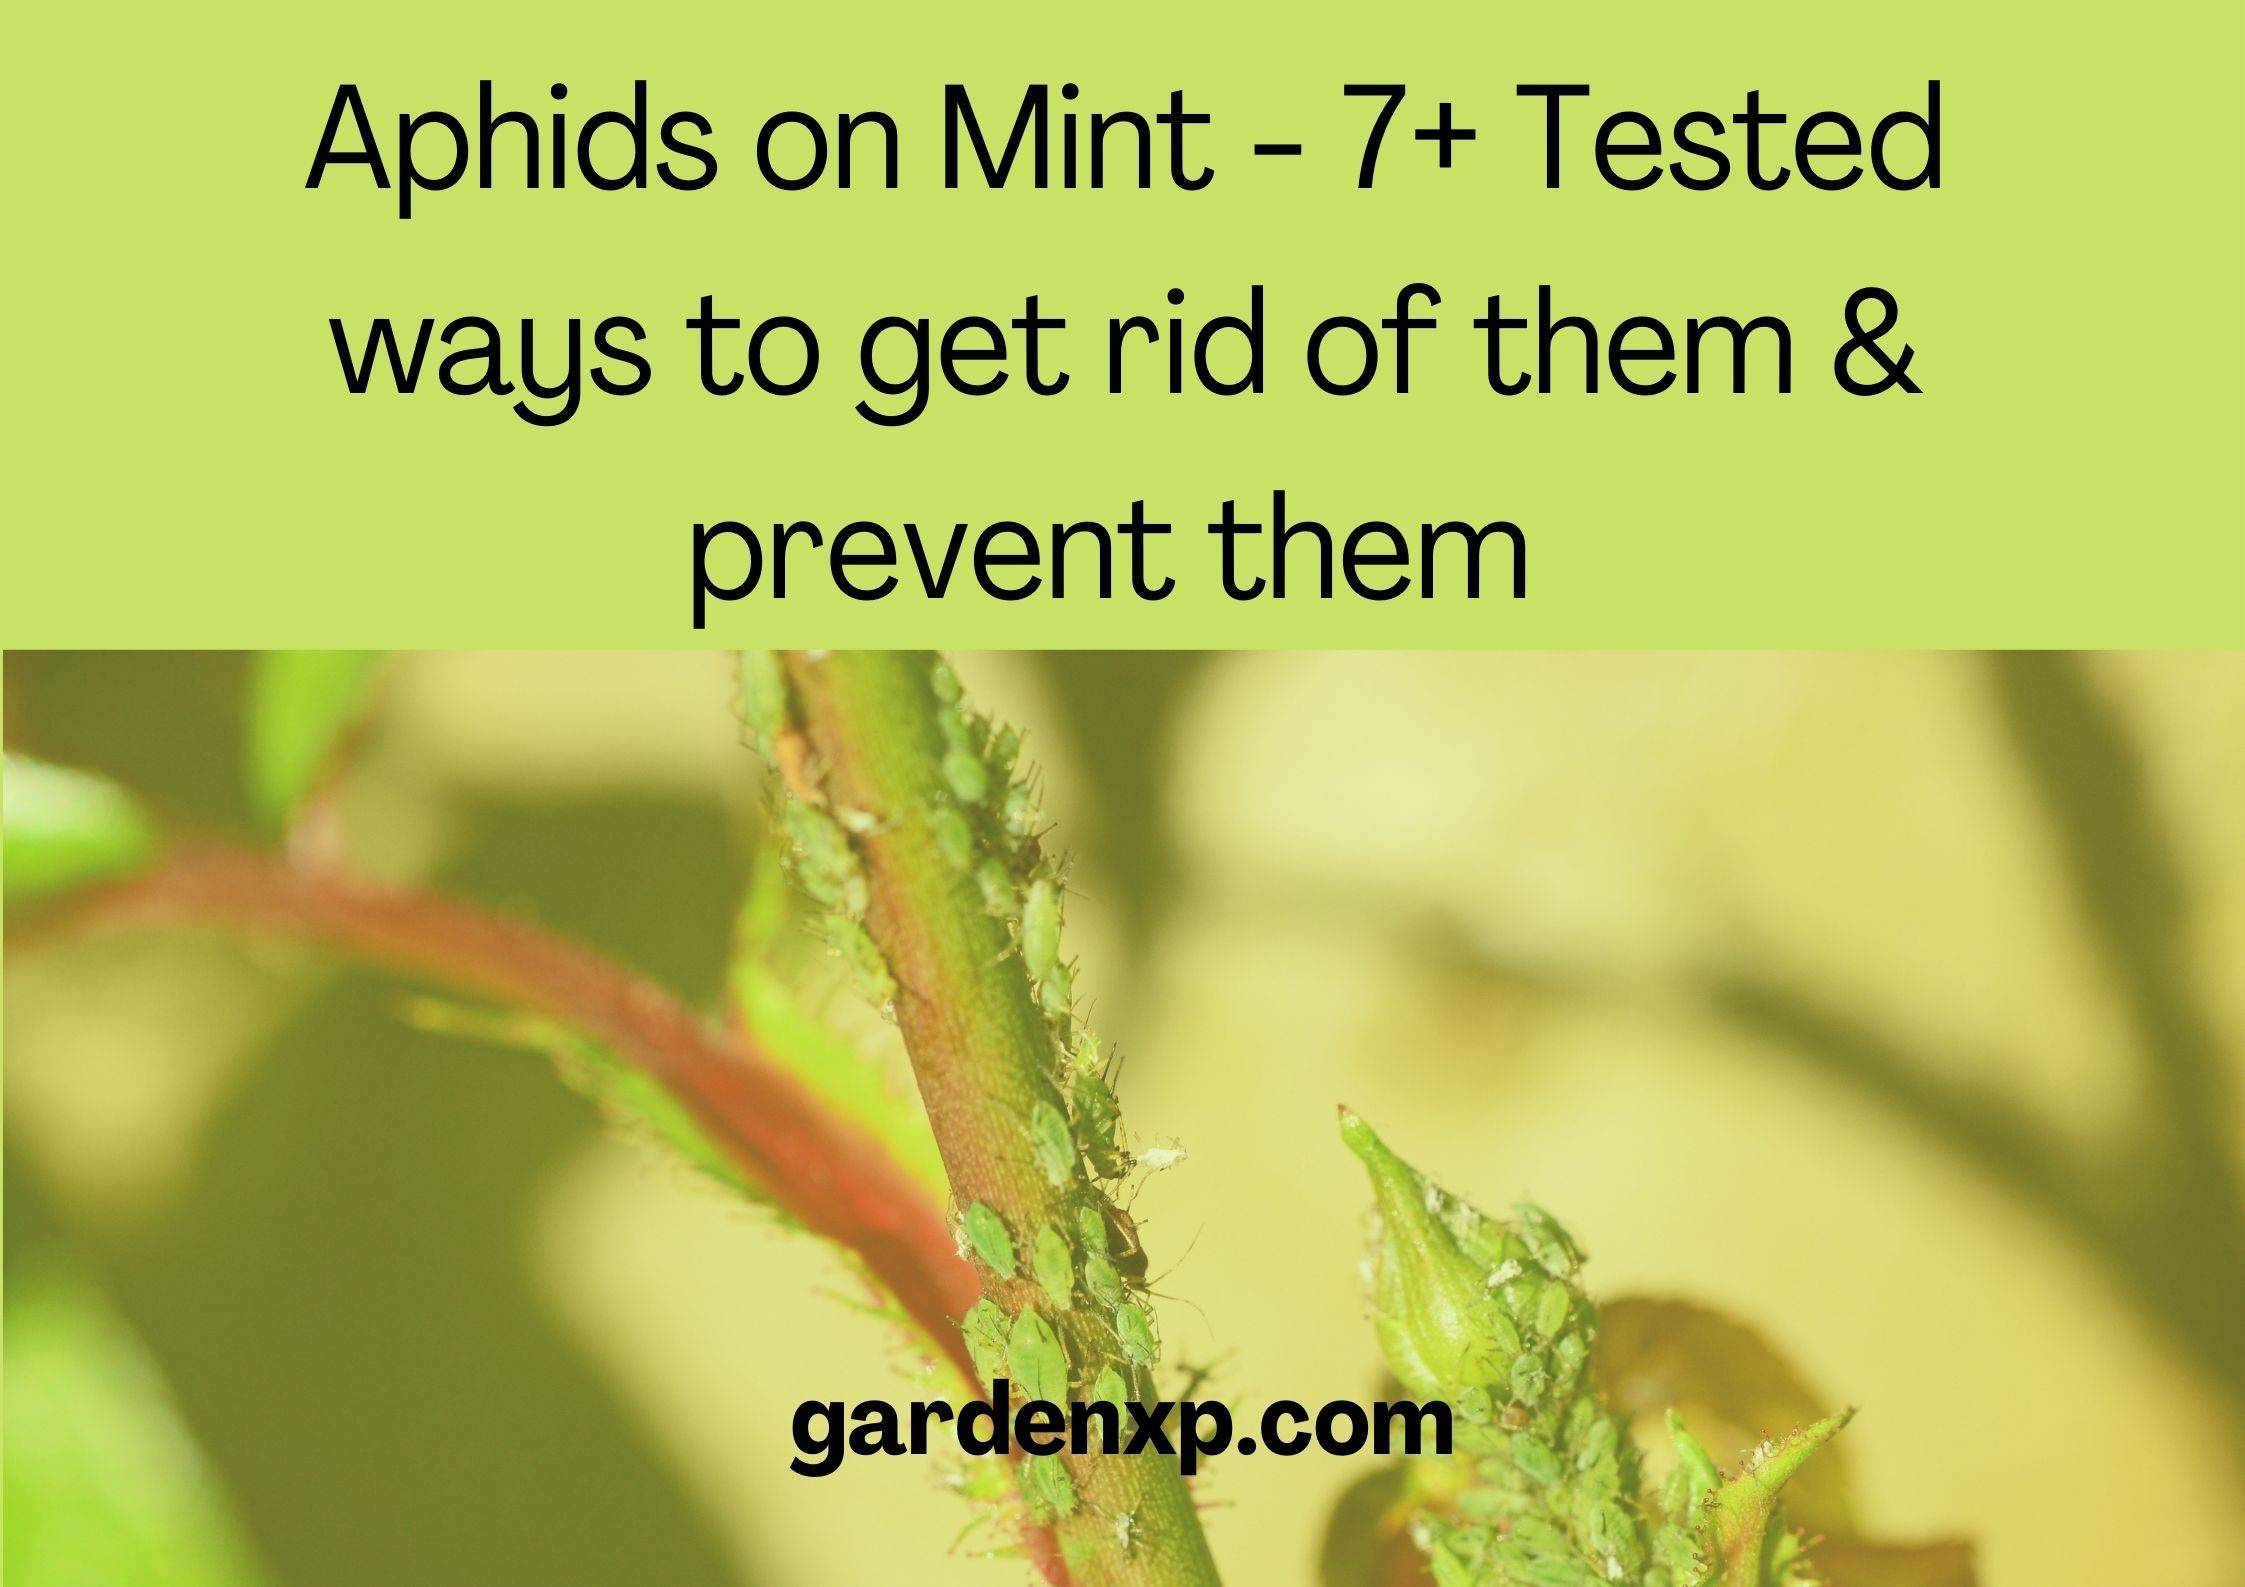 Aphids on Mint - 7+ Tested ways to get rid of them & prevent them 